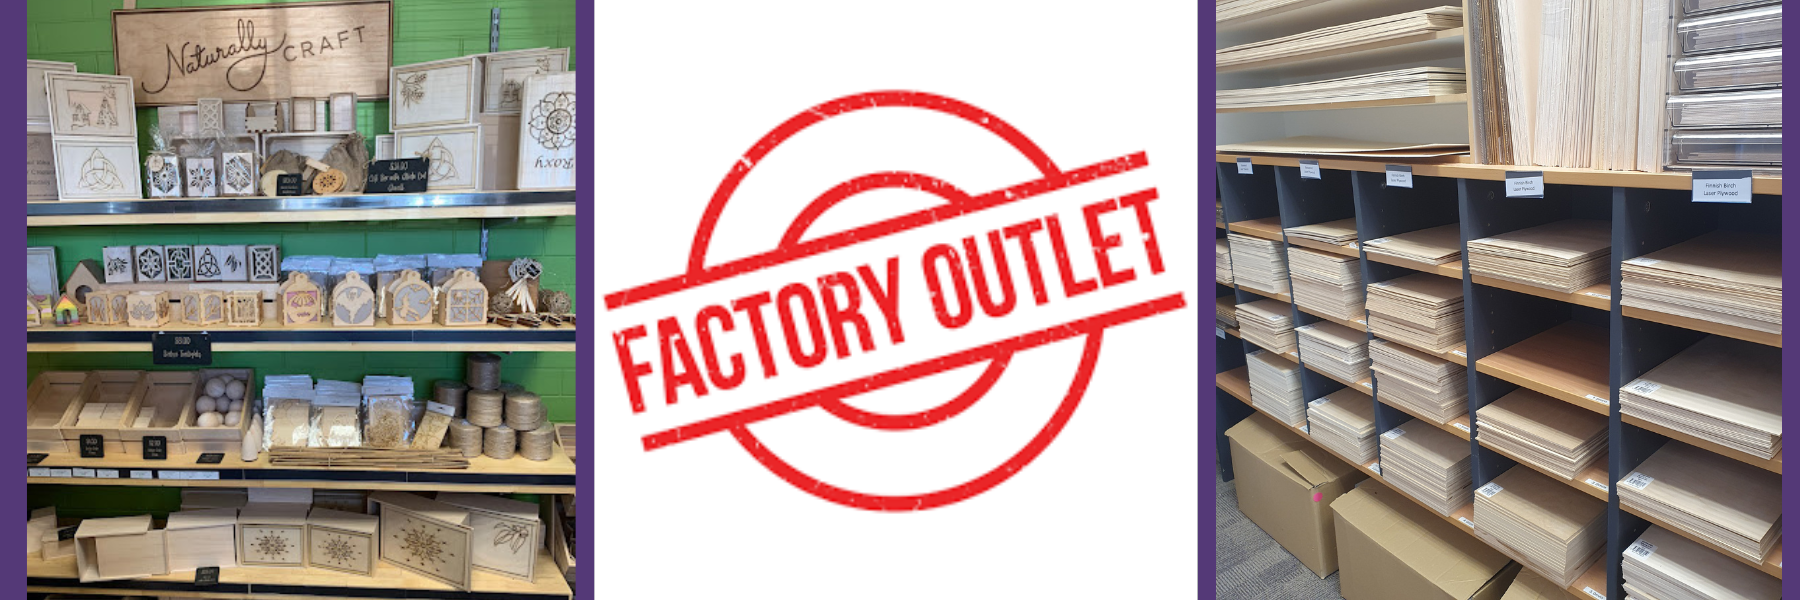 visit our Factory Outlet